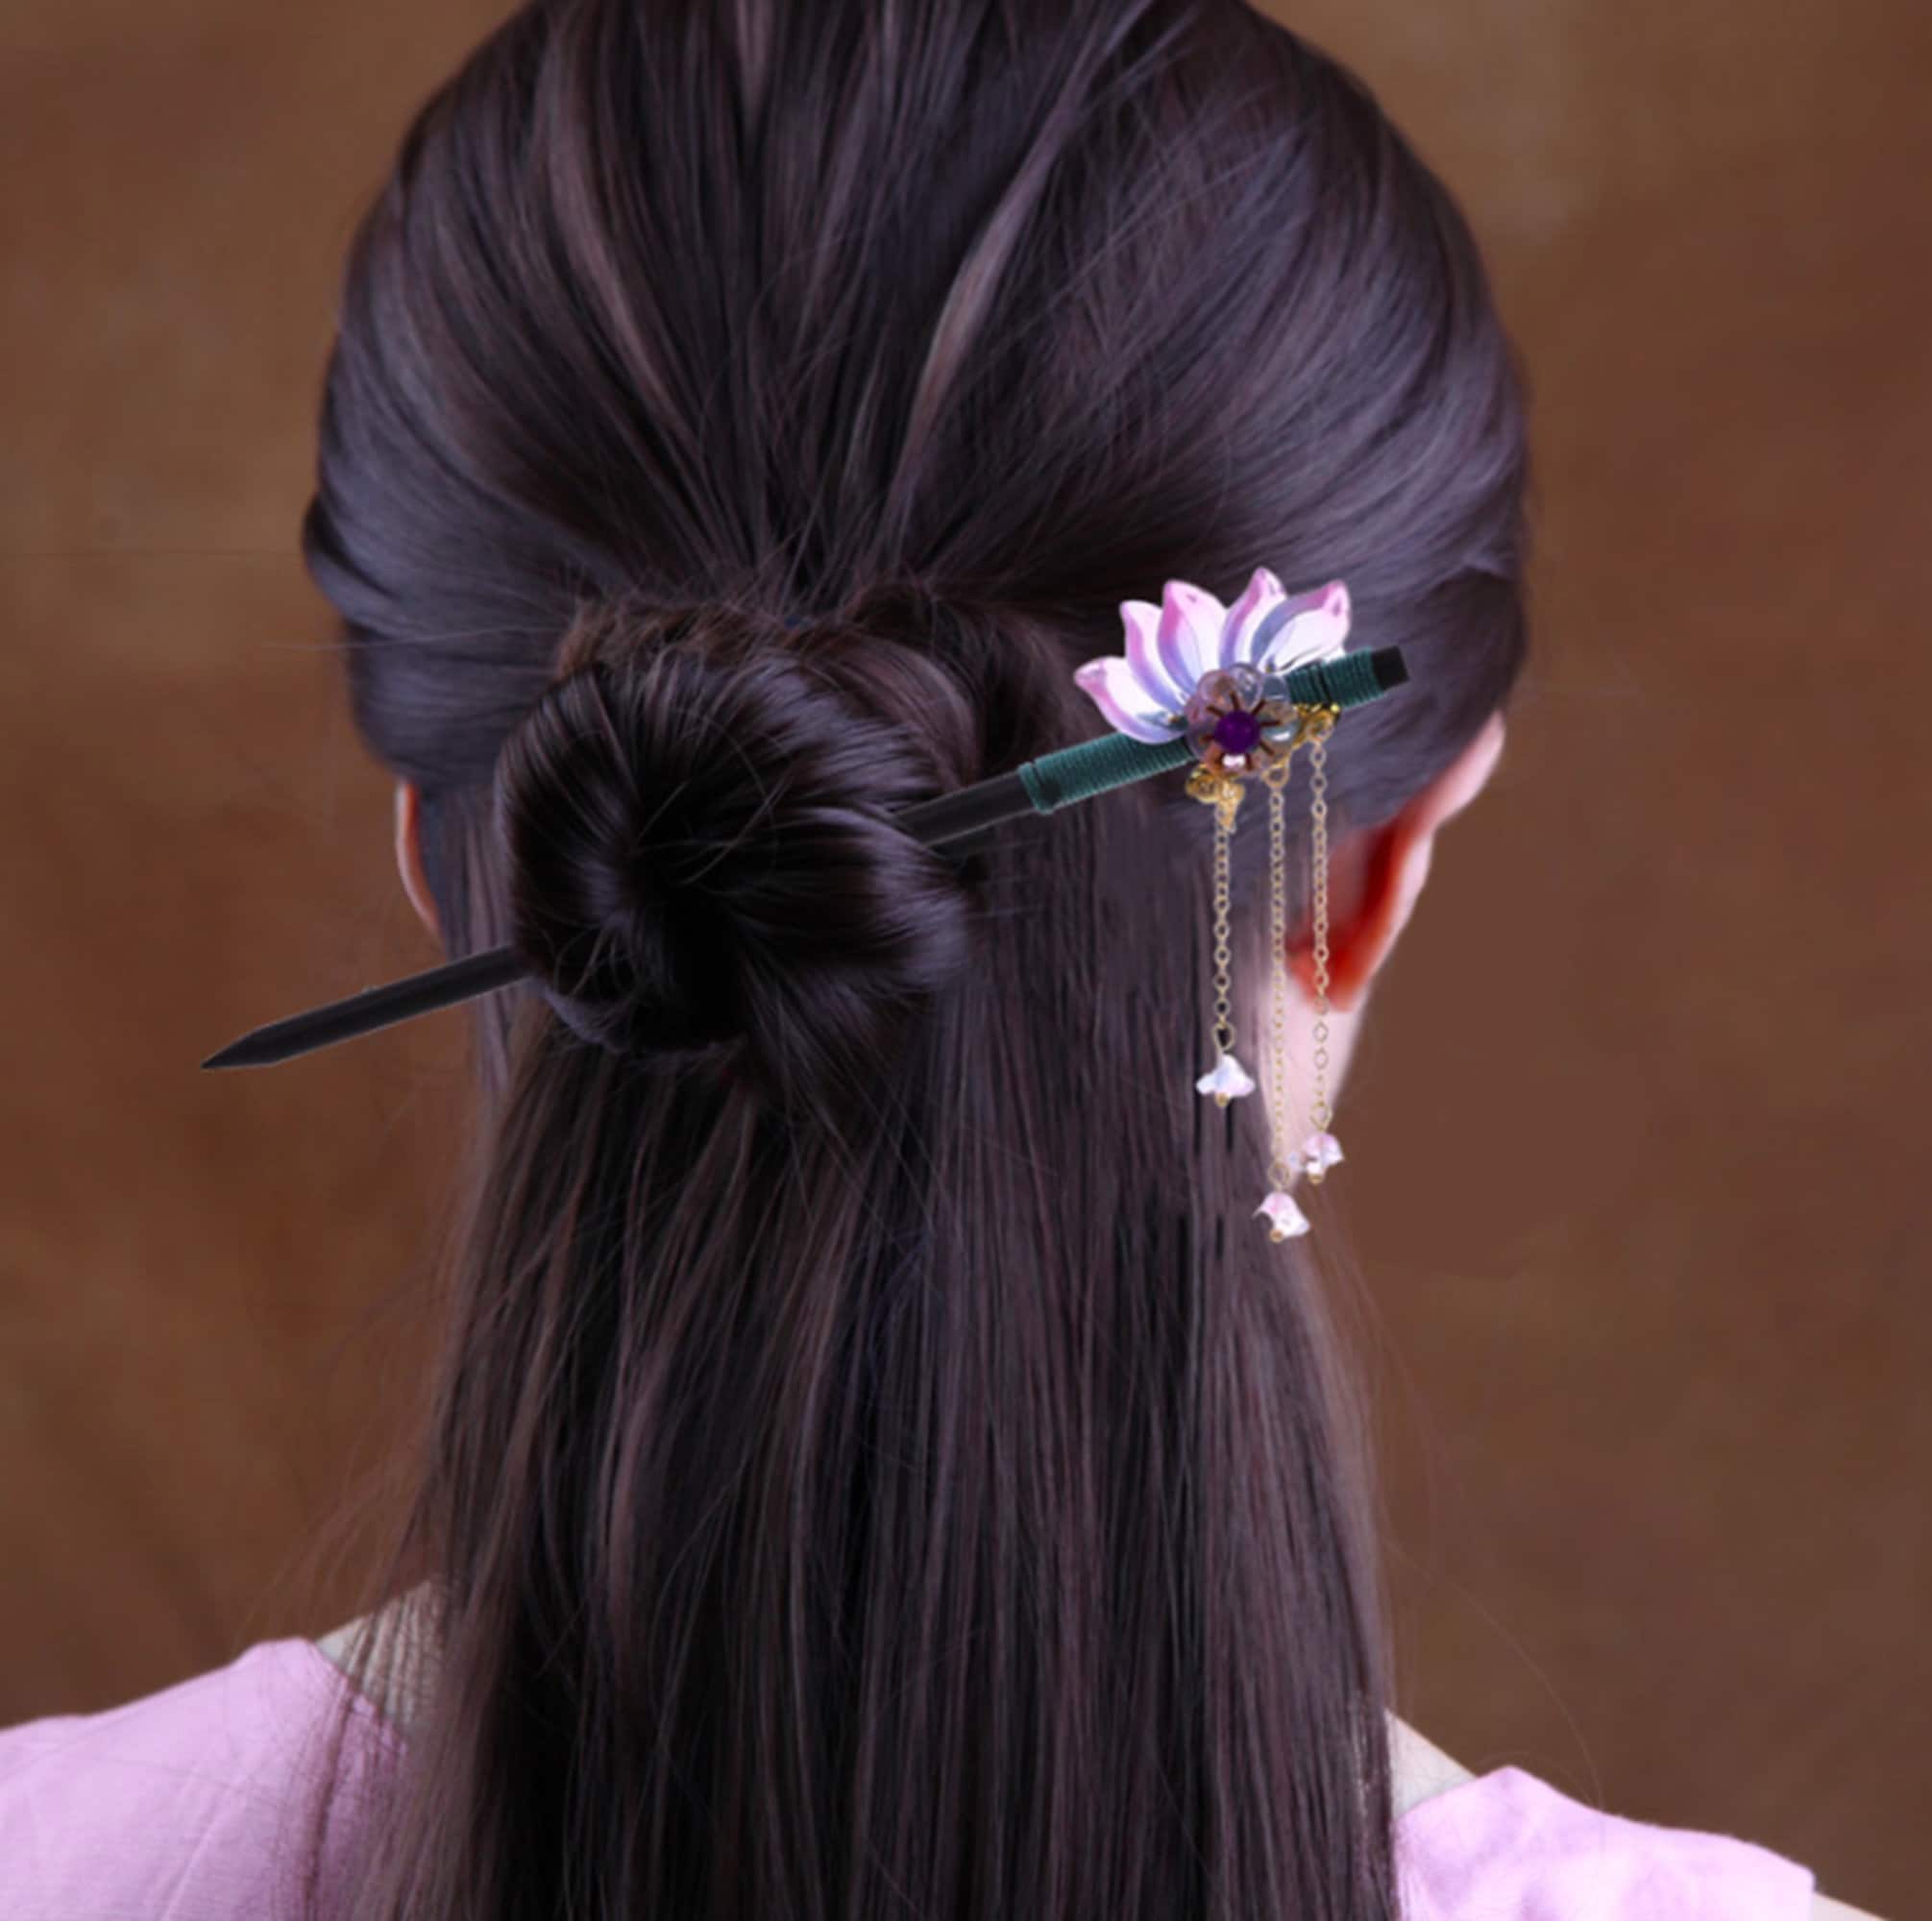 Female Hairdo | Chinese hairstyle, Japanese hairstyle, Traditional hairstyle